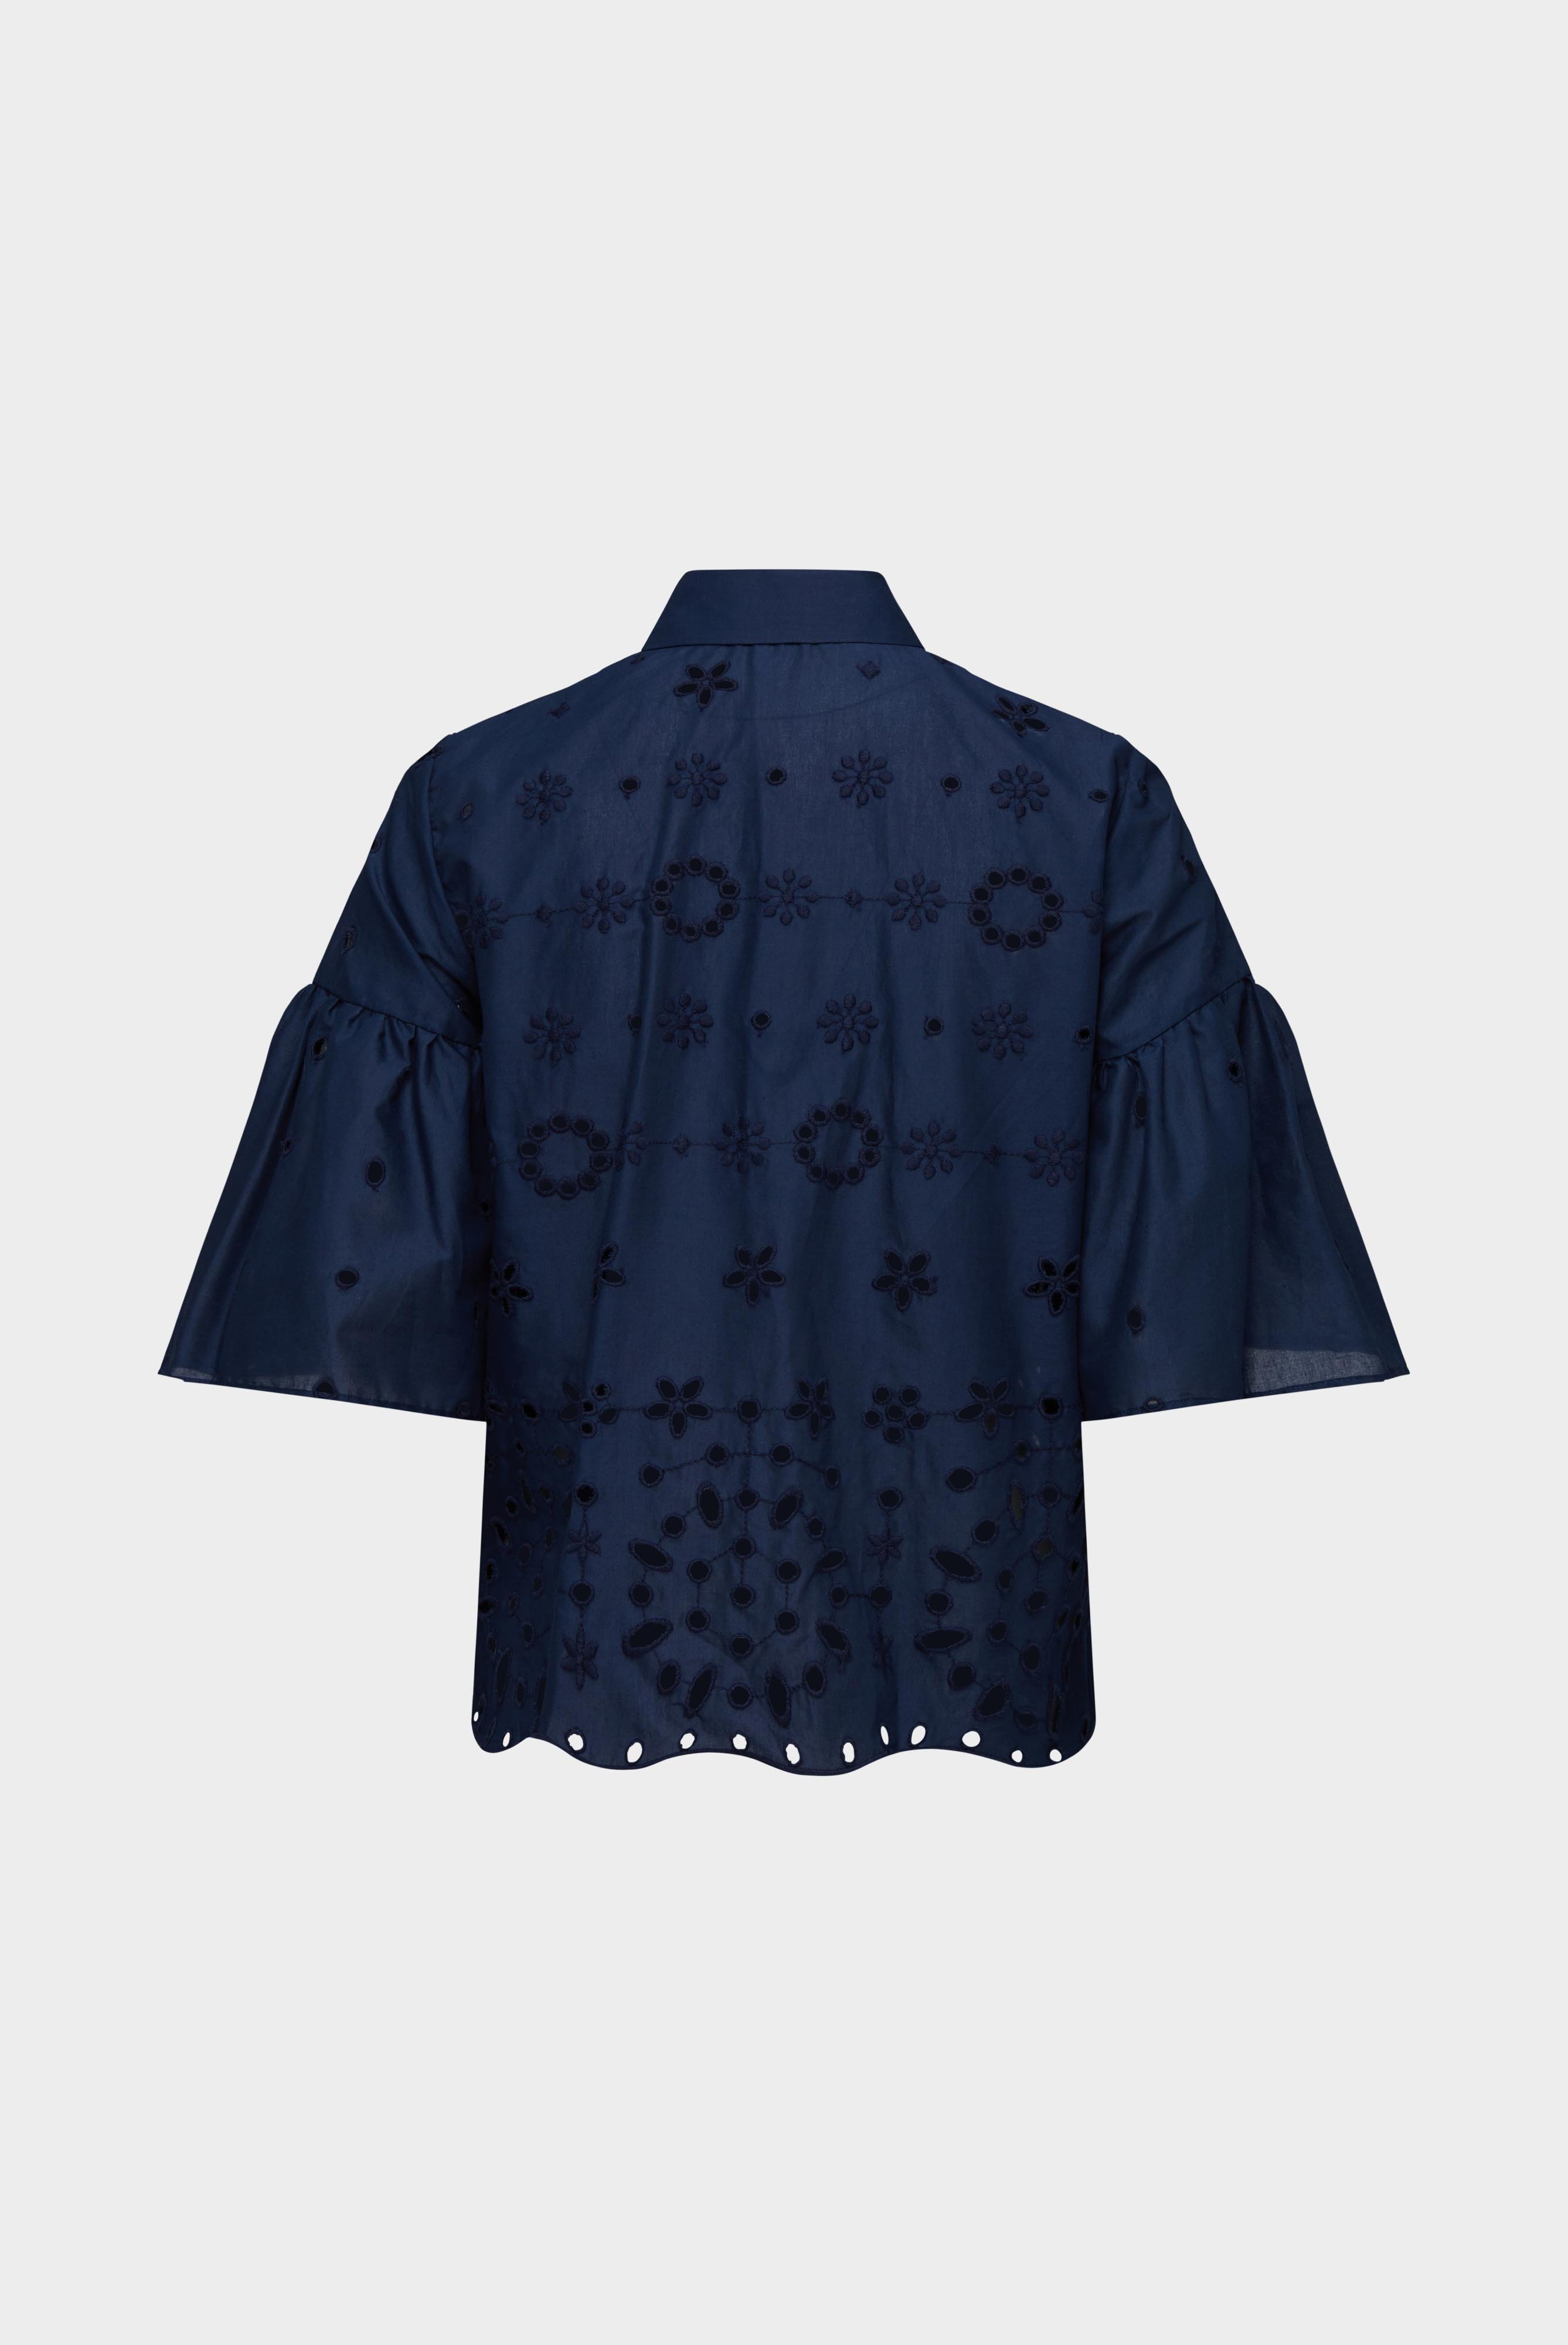 Casual Blouses+A-line blouse with ruffle details and embroidery made of blue cotton+05.525V.5X.150228.790.32